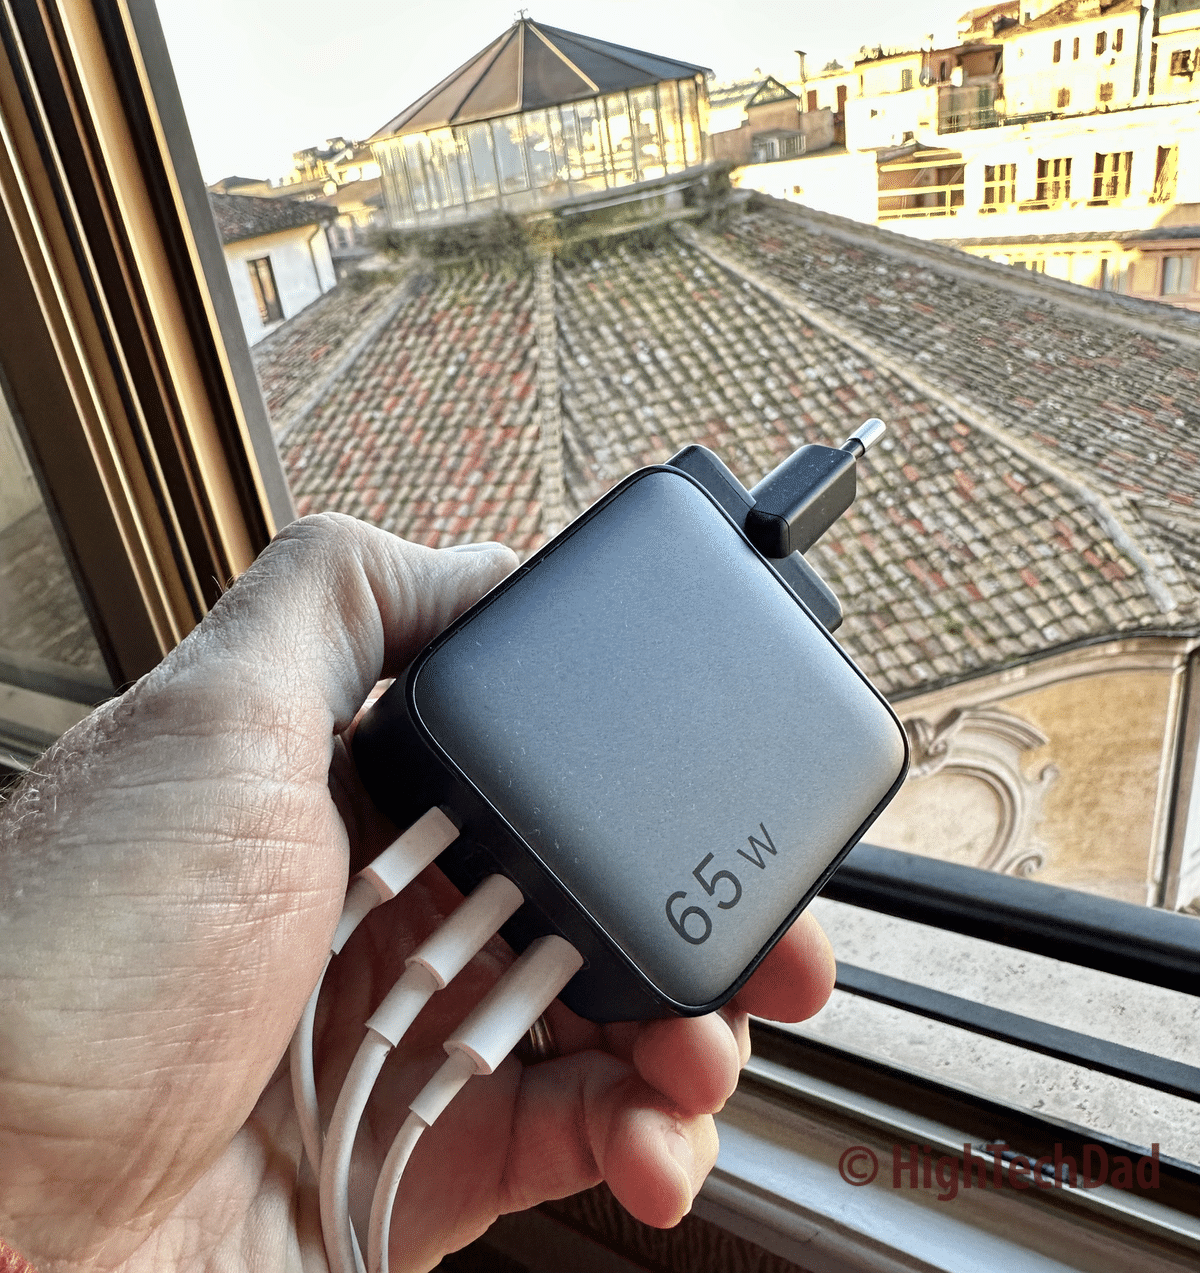 When You Travel Overseas, You Only Need this One Travel Charger